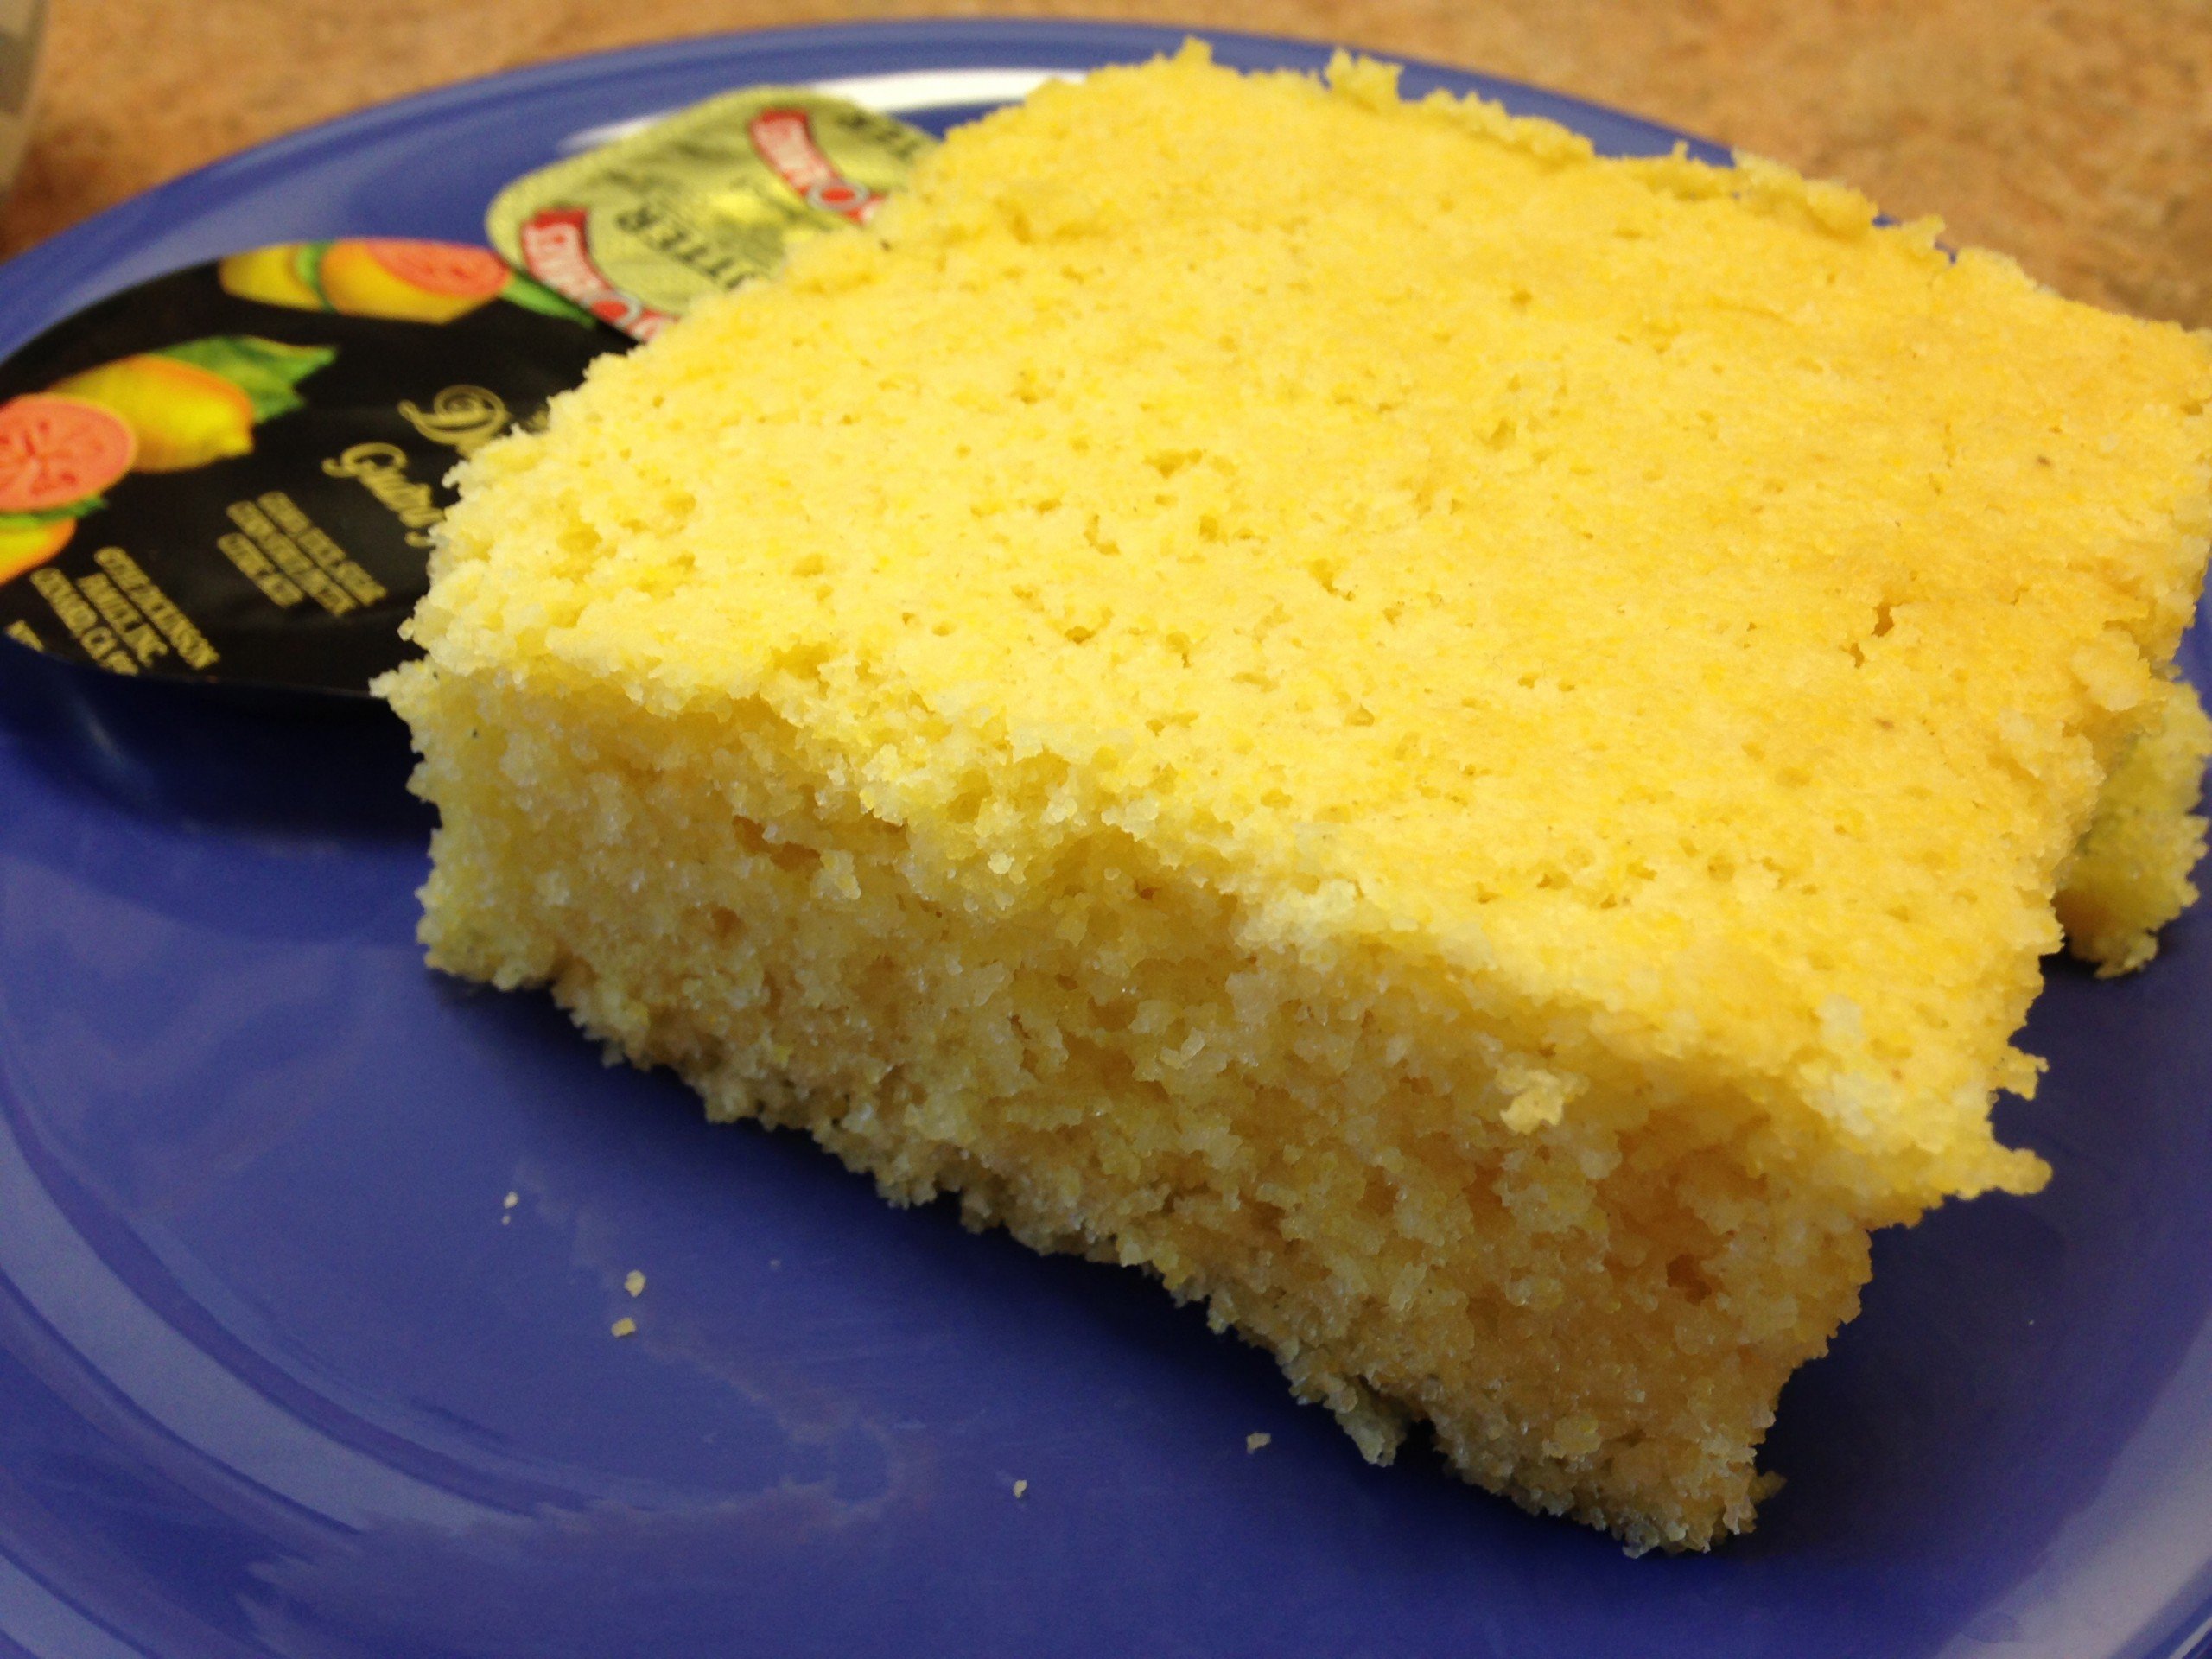 Here it is the famous cornbread, and it's as good as I remember. Buttery, moist, not too sweet and has just right amount of corn crunch.  